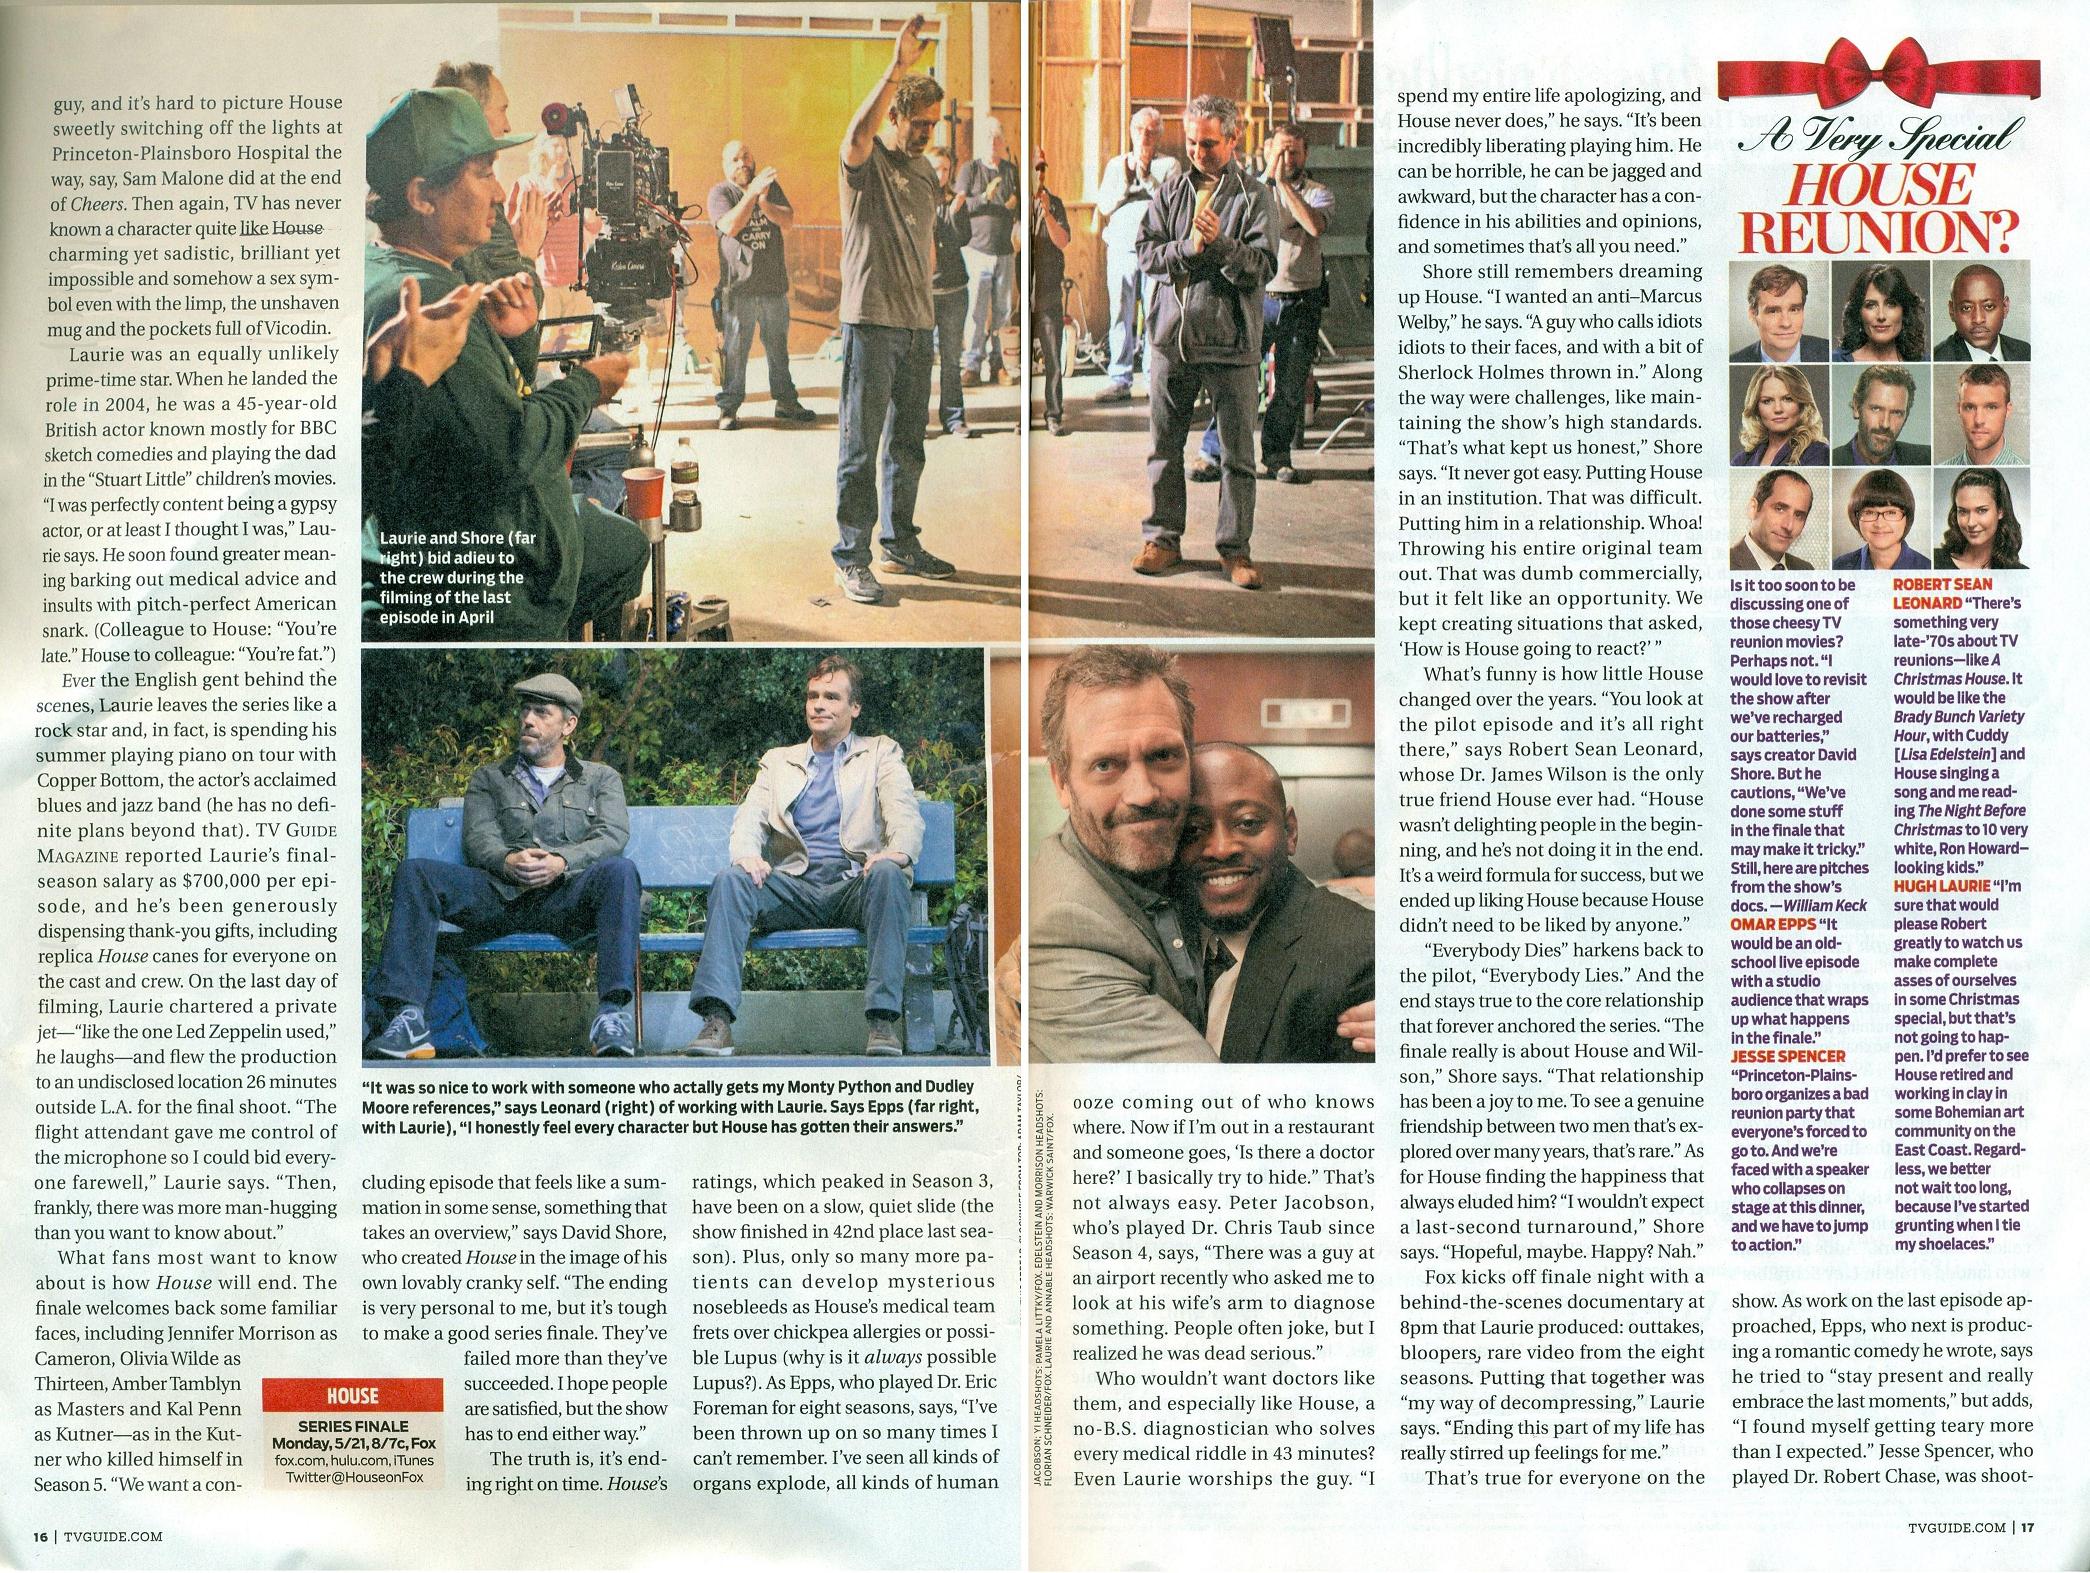 House TV Guide Article Part III